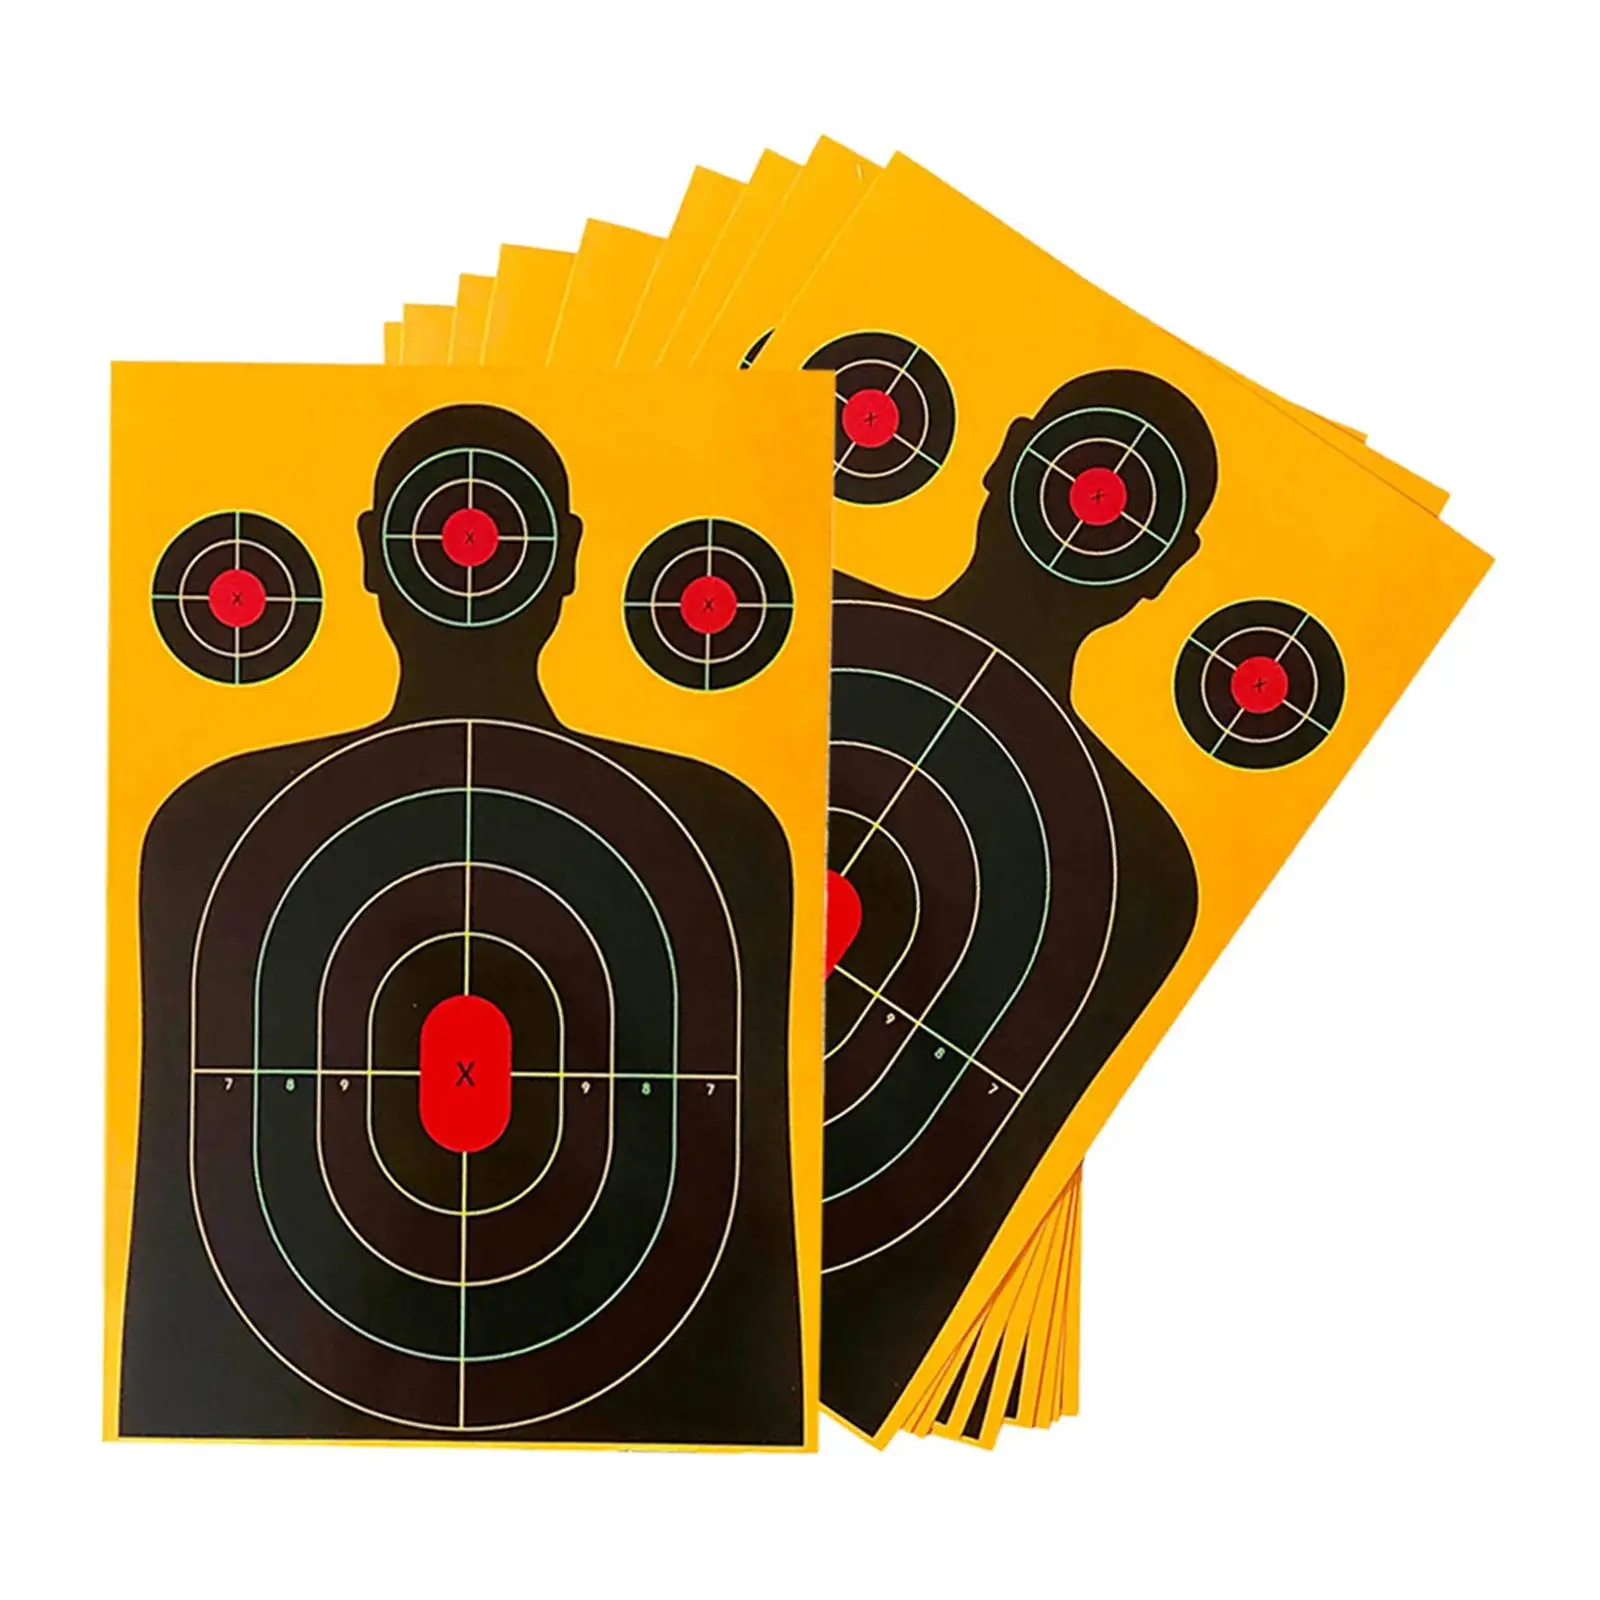 10Pcs Silhouette Target Hunting Highly Visible Letter Partition without Stand Wargame Training Target Hunting Silhouette Target